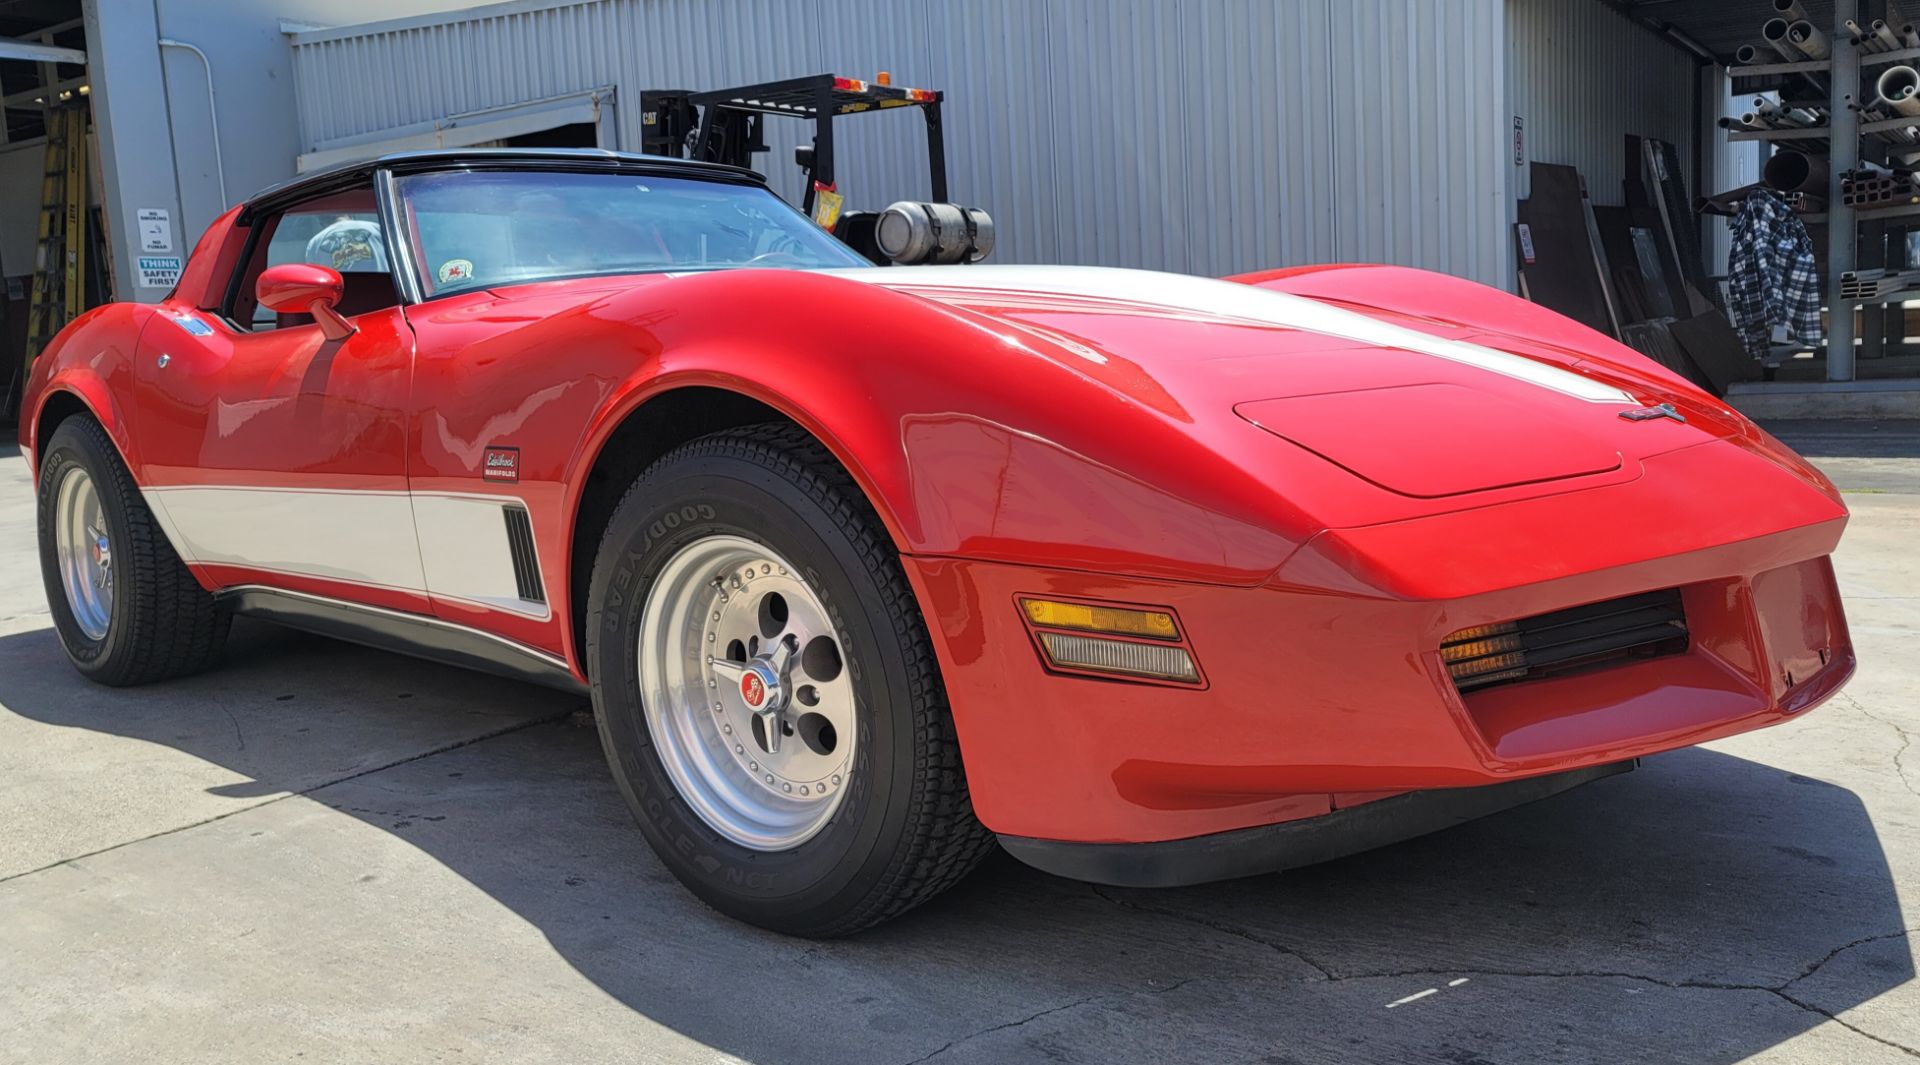 1980 CHEVROLET CORVETTE, WAS VIC EDELBROCK'S PERSONAL CAR BOUGHT FOR R&D, RED INTERIOR, TITLE ONLY. - Image 9 of 70